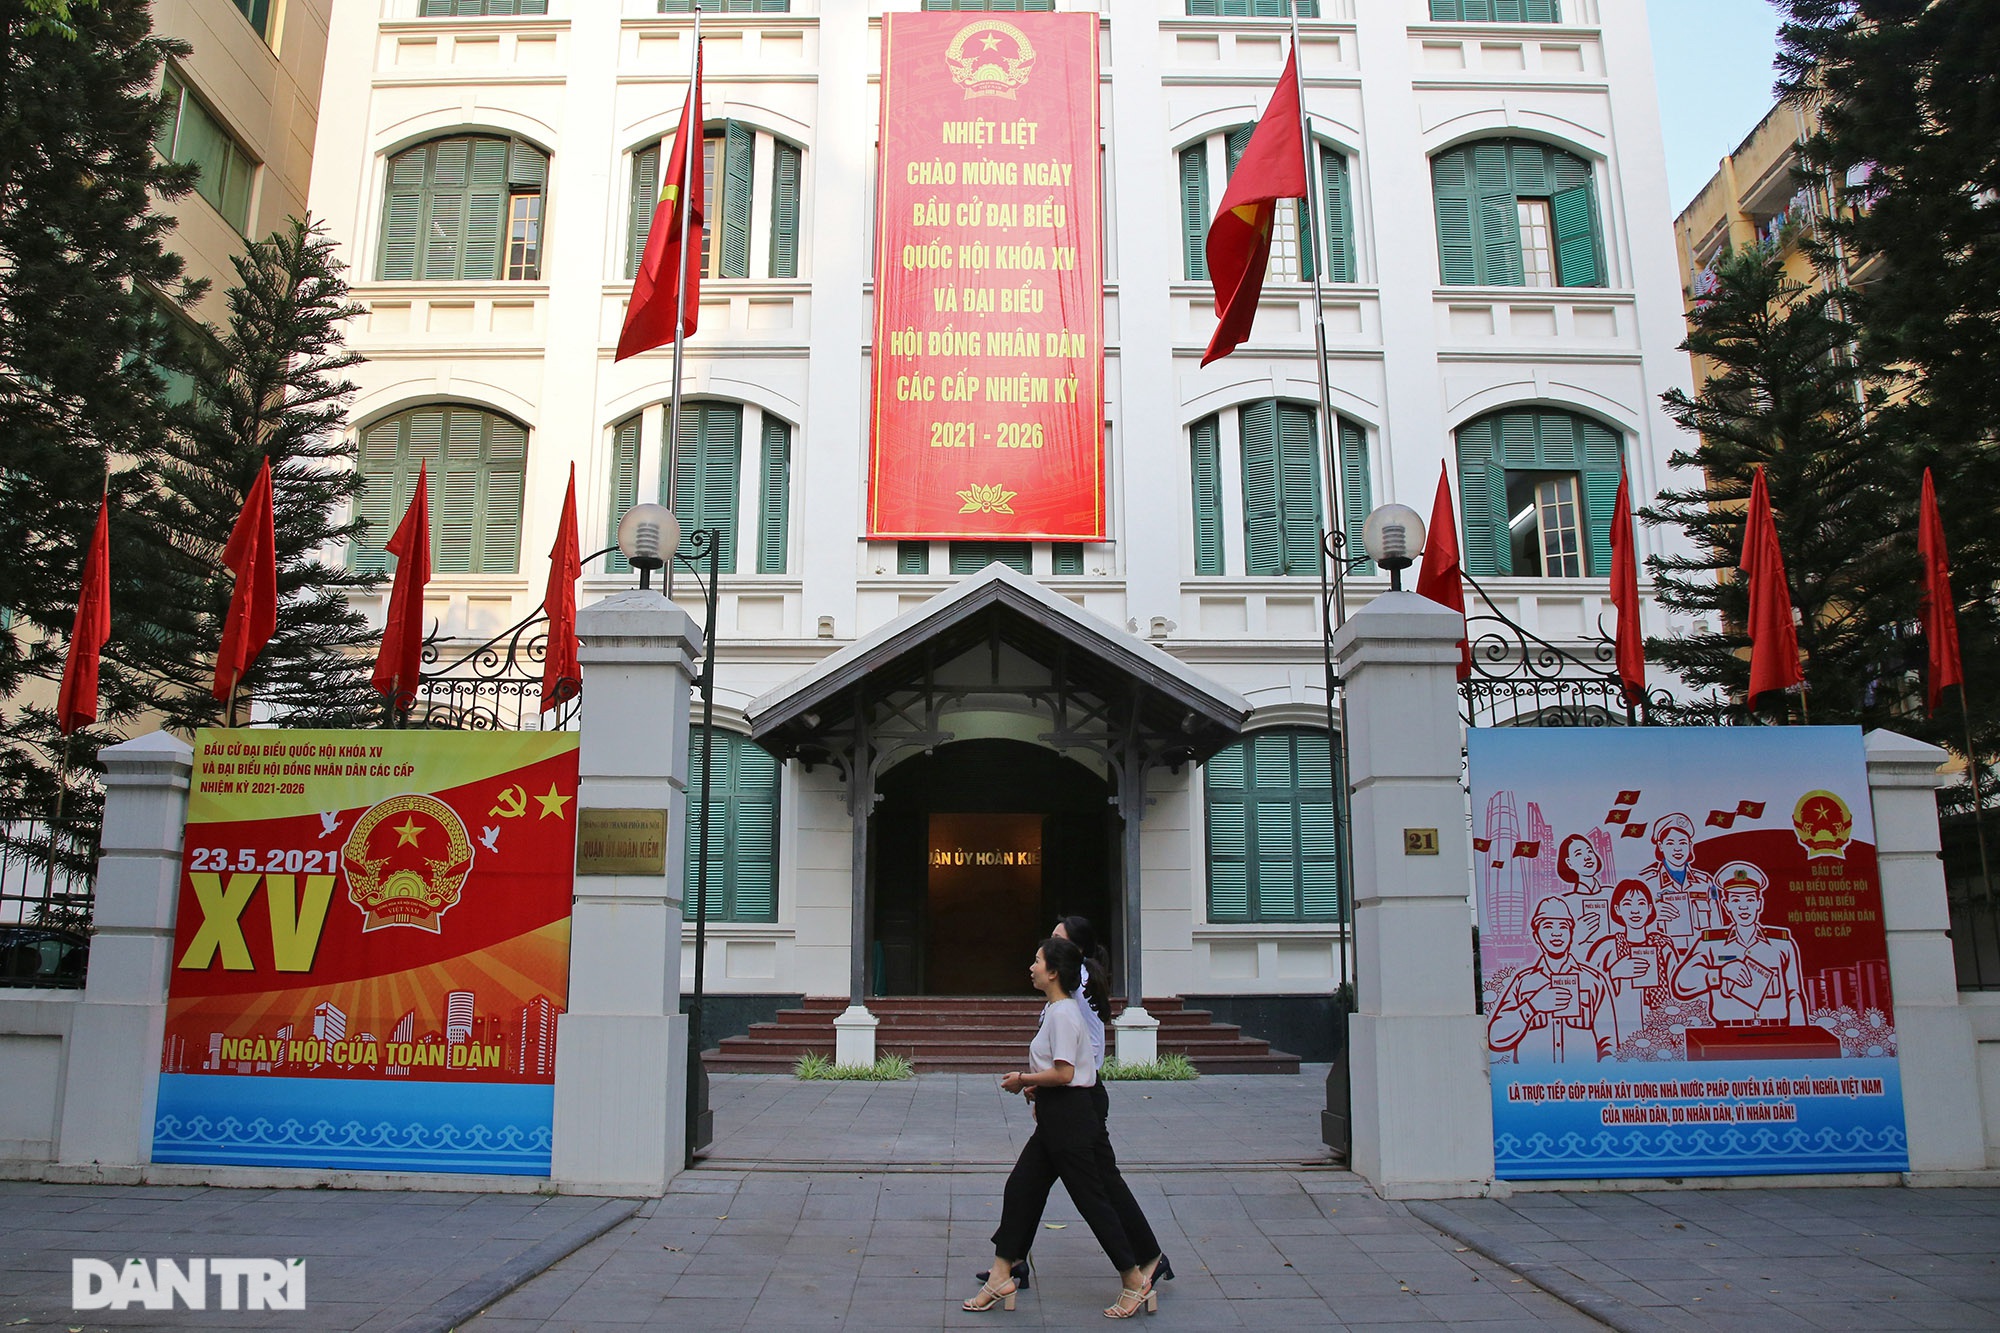 Hanoi’s streets decorated ahead of election day